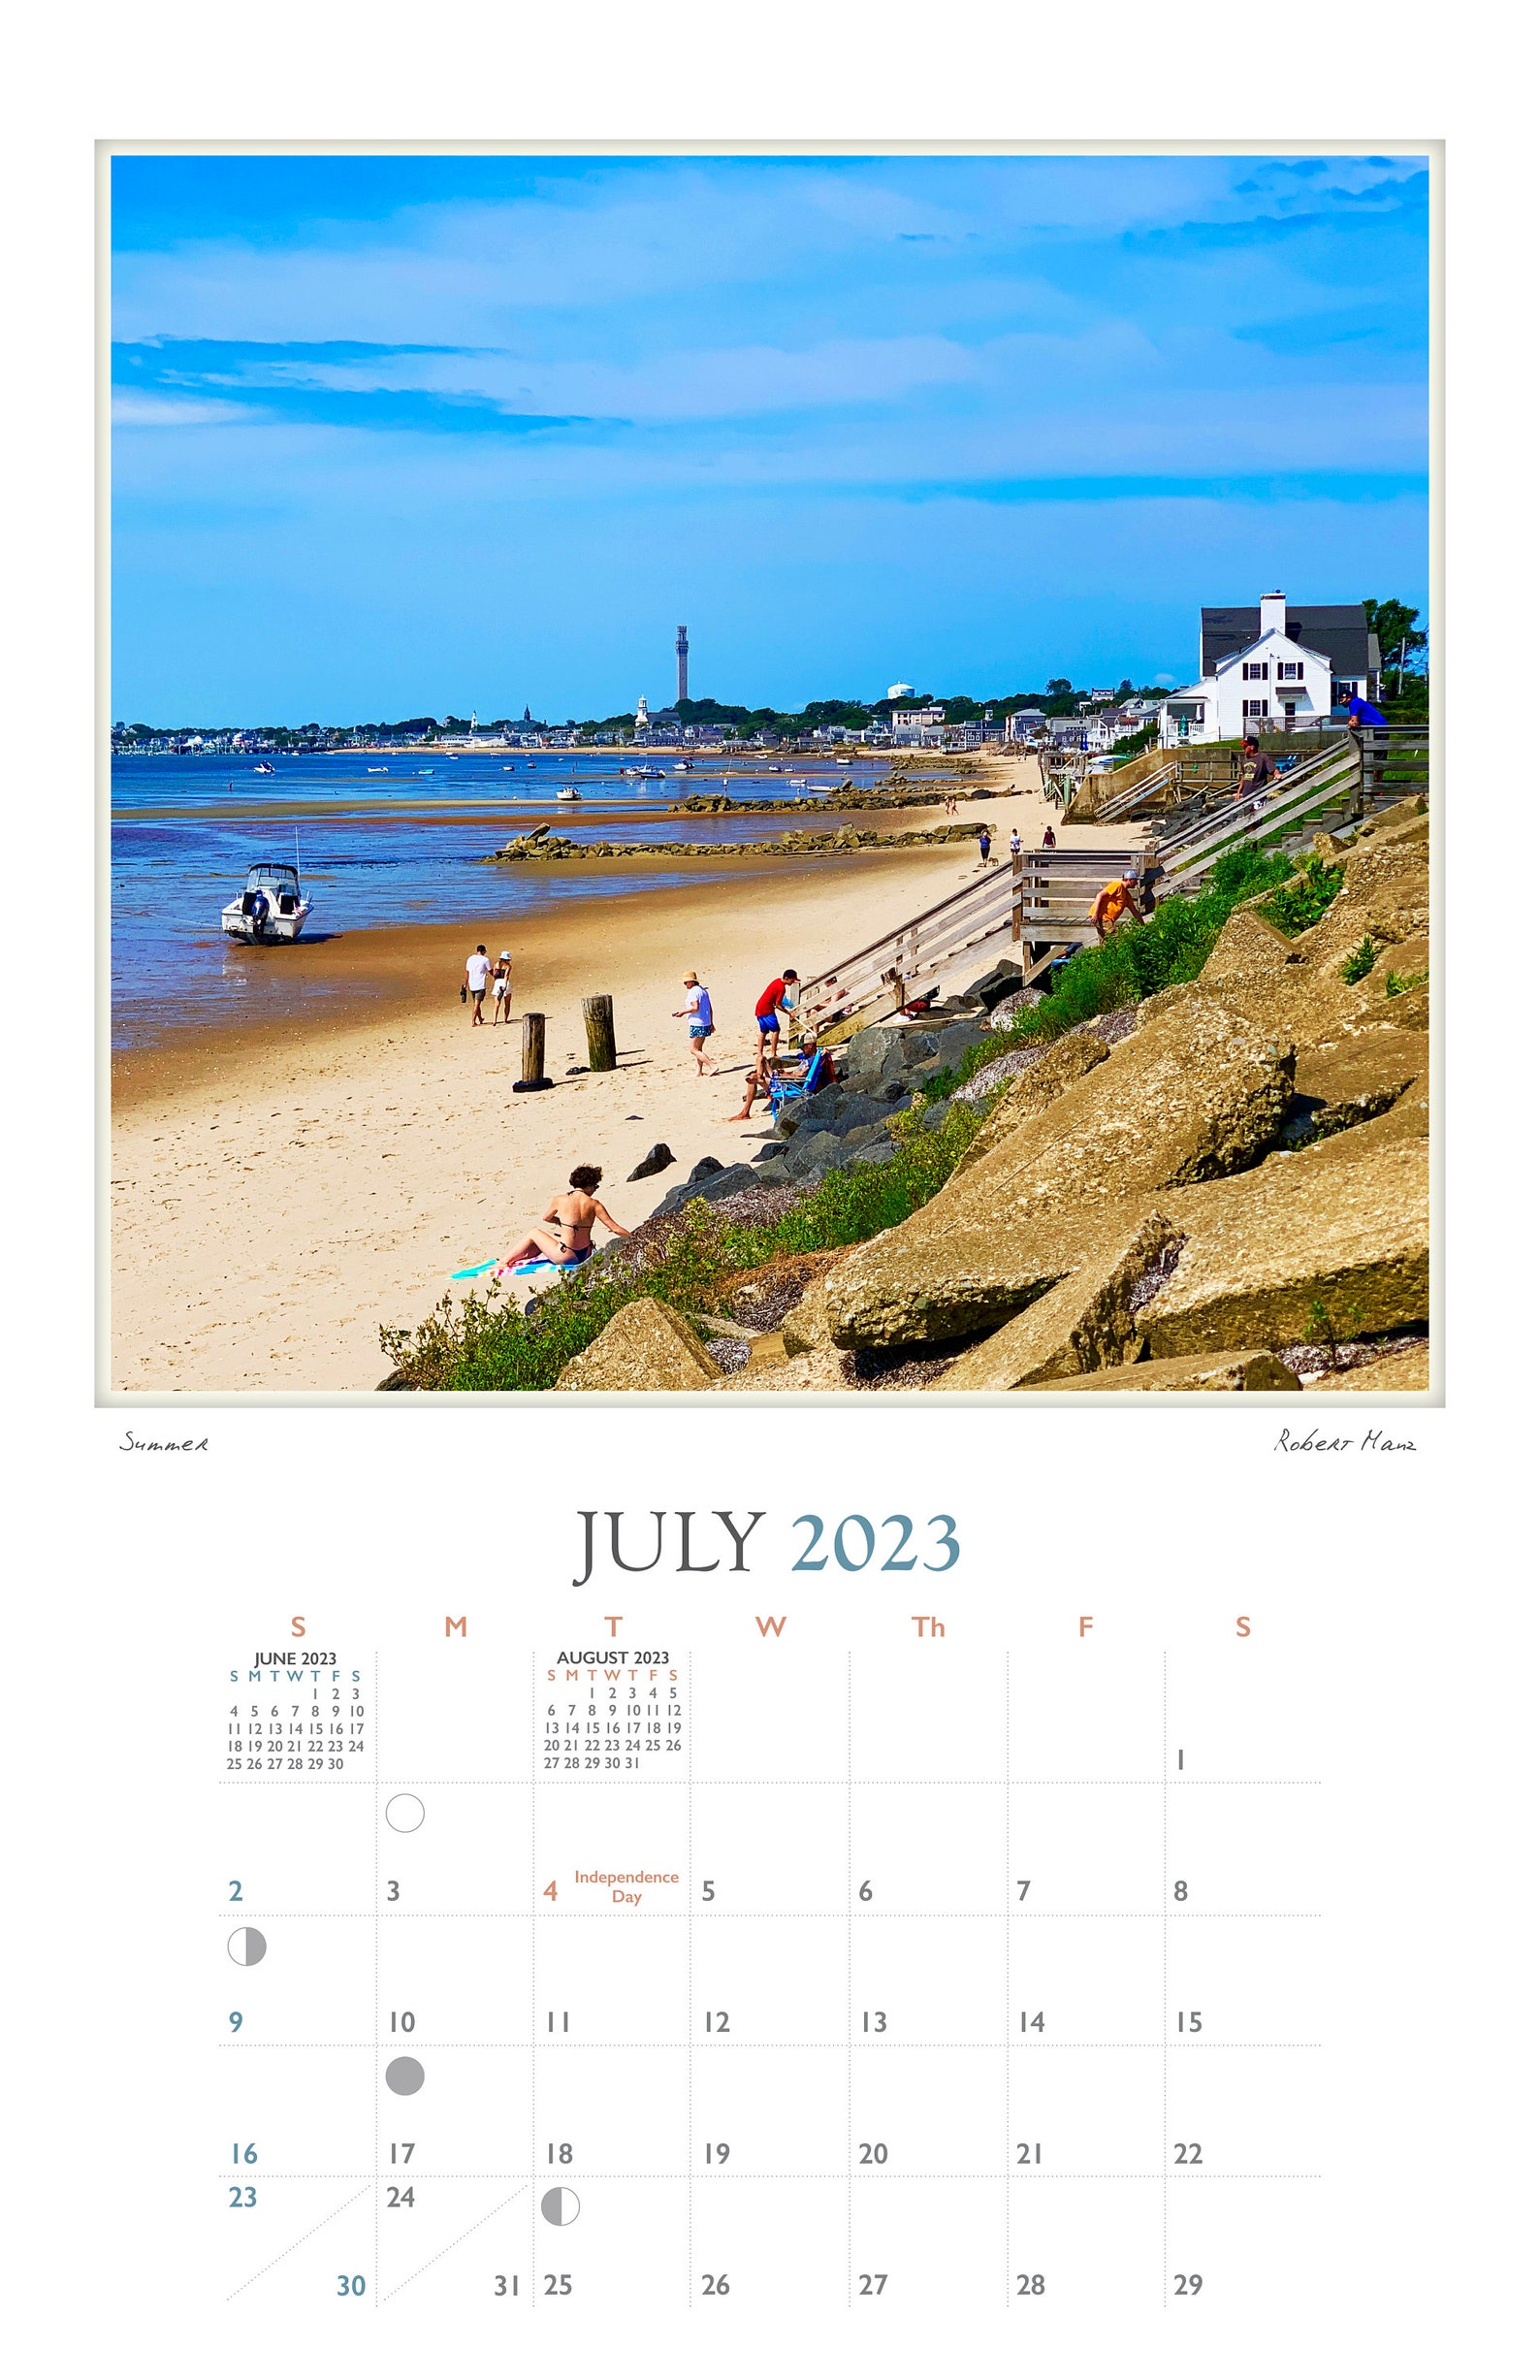 Provincetown on Cape Cod 2023 Calendar of Scenes From Etsy